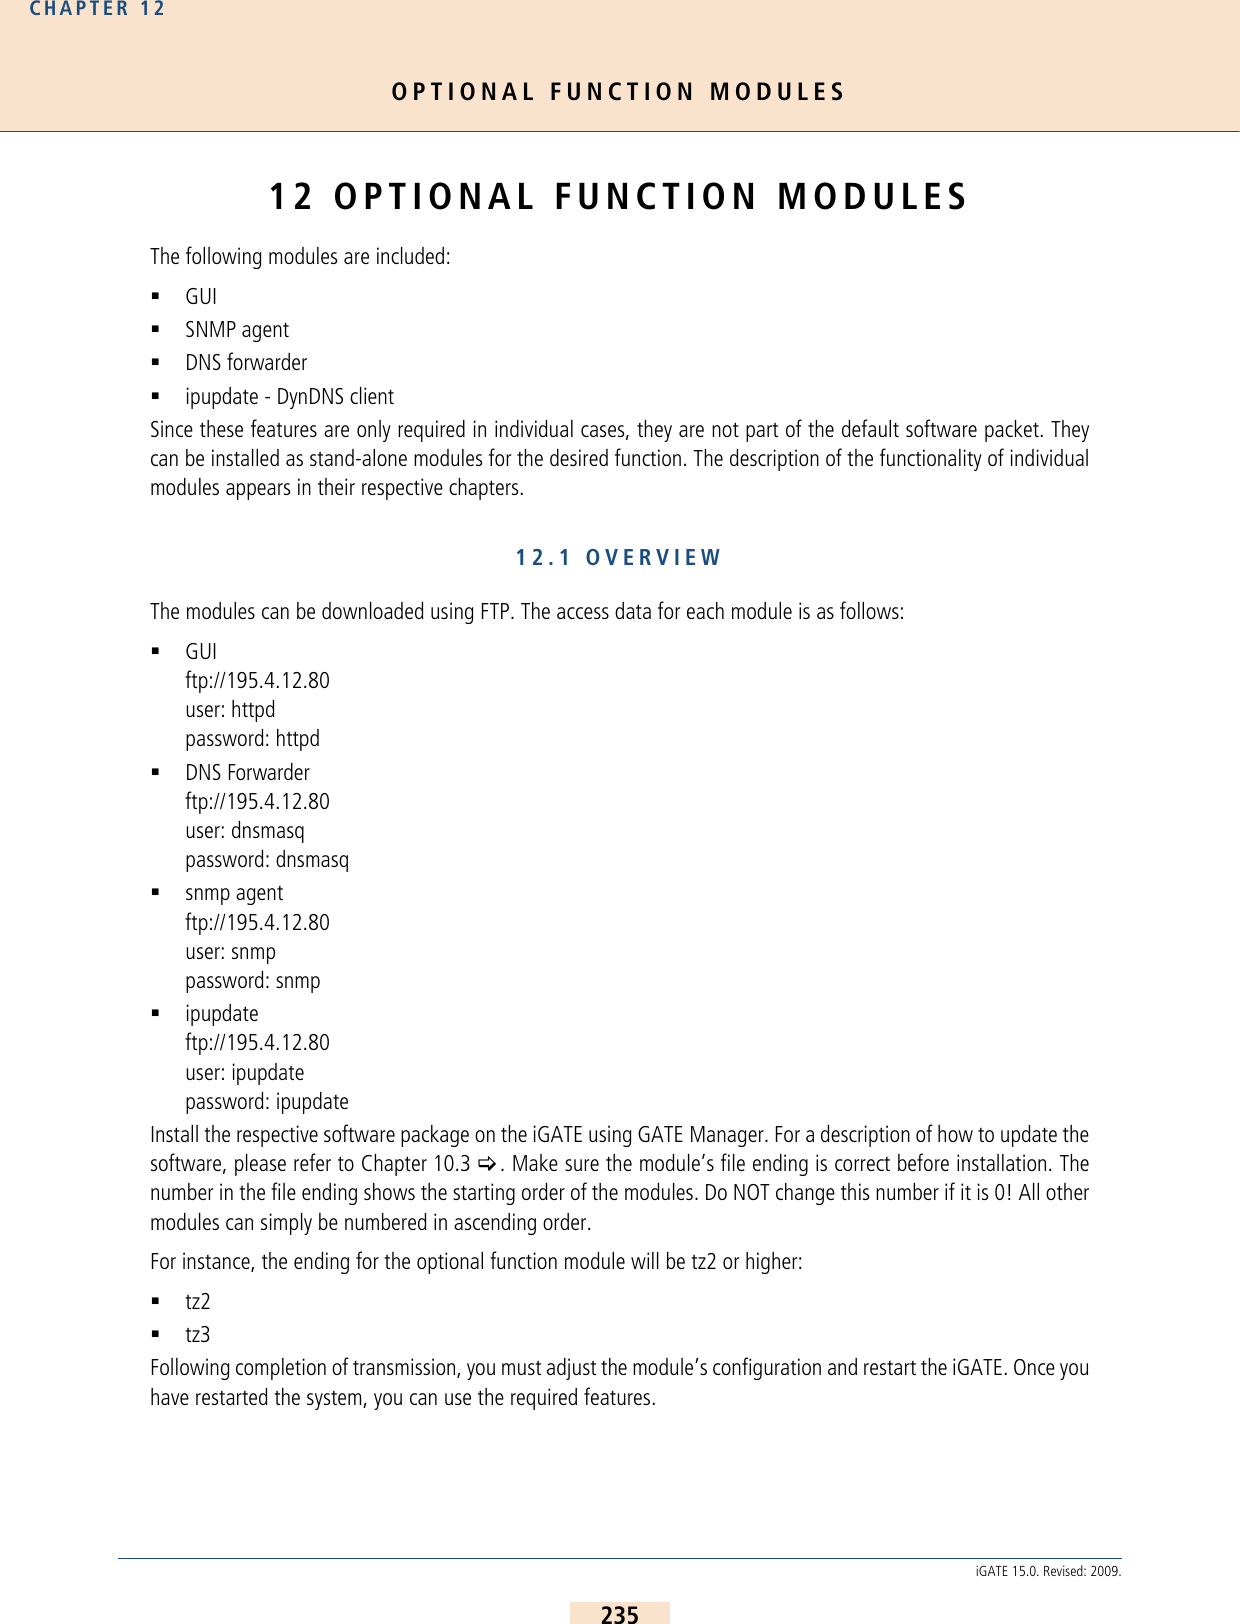 OPTIONAL FUNCTION MODULESCHAPTER 12235iGATE 15.0. Revised: 2009.12 OPTIONAL FUNCTION MODULESThe following modules are included:GUISNMP agentDNS forwarderipupdate - DynDNS clientSince these features are only required in individual cases, they are not part of the default software packet. Theycan be installed as stand-alone modules for the desired function. The description of the functionality of individualmodules appears in their respective chapters.12.1 OVERVIEWThe modules can be downloaded using FTP. The access data for each module is as follows:GUIftp://195.4.12.80user: httpdpassword: httpdDNS Forwarderftp://195.4.12.80user: dnsmasqpassword: dnsmasqsnmp agentftp://195.4.12.80user: snmppassword: snmpipupdateftp://195.4.12.80user: ipupdatepassword: ipupdateInstall the respective software package on the iGATE using GATE Manager. For a description of how to update thesoftware, please refer to Chapter 10.3 &gt;. Make sure the module’s file ending is correct before installation. Thenumber in the file ending shows the starting order of the modules. Do NOT change this number if it is 0! All othermodules can simply be numbered in ascending order. For instance, the ending for the optional function module will be tz2 or higher:tz2tz3Following completion of transmission, you must adjust the module’s configuration and restart the iGATE. Once youhave restarted the system, you can use the required features.